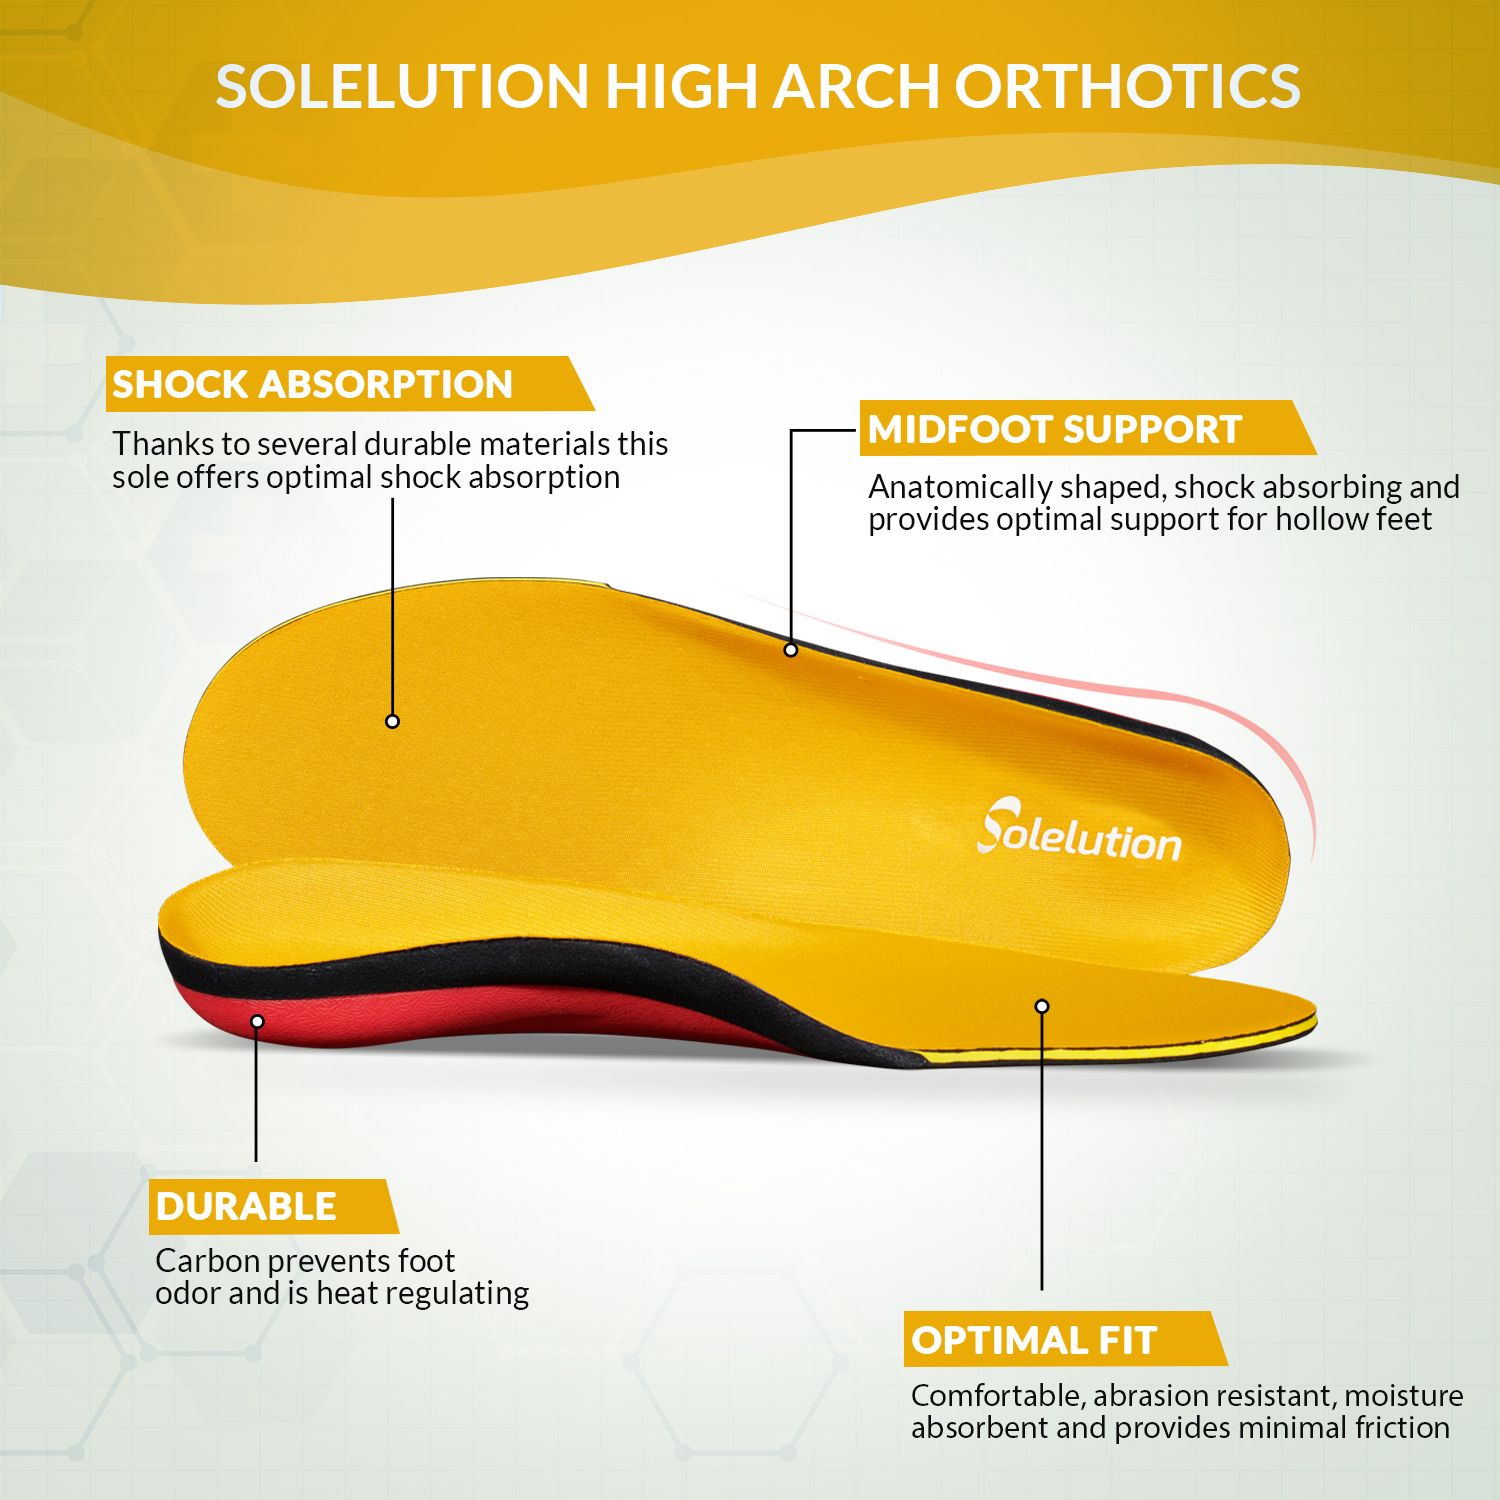 solelution high arch orthotics product information